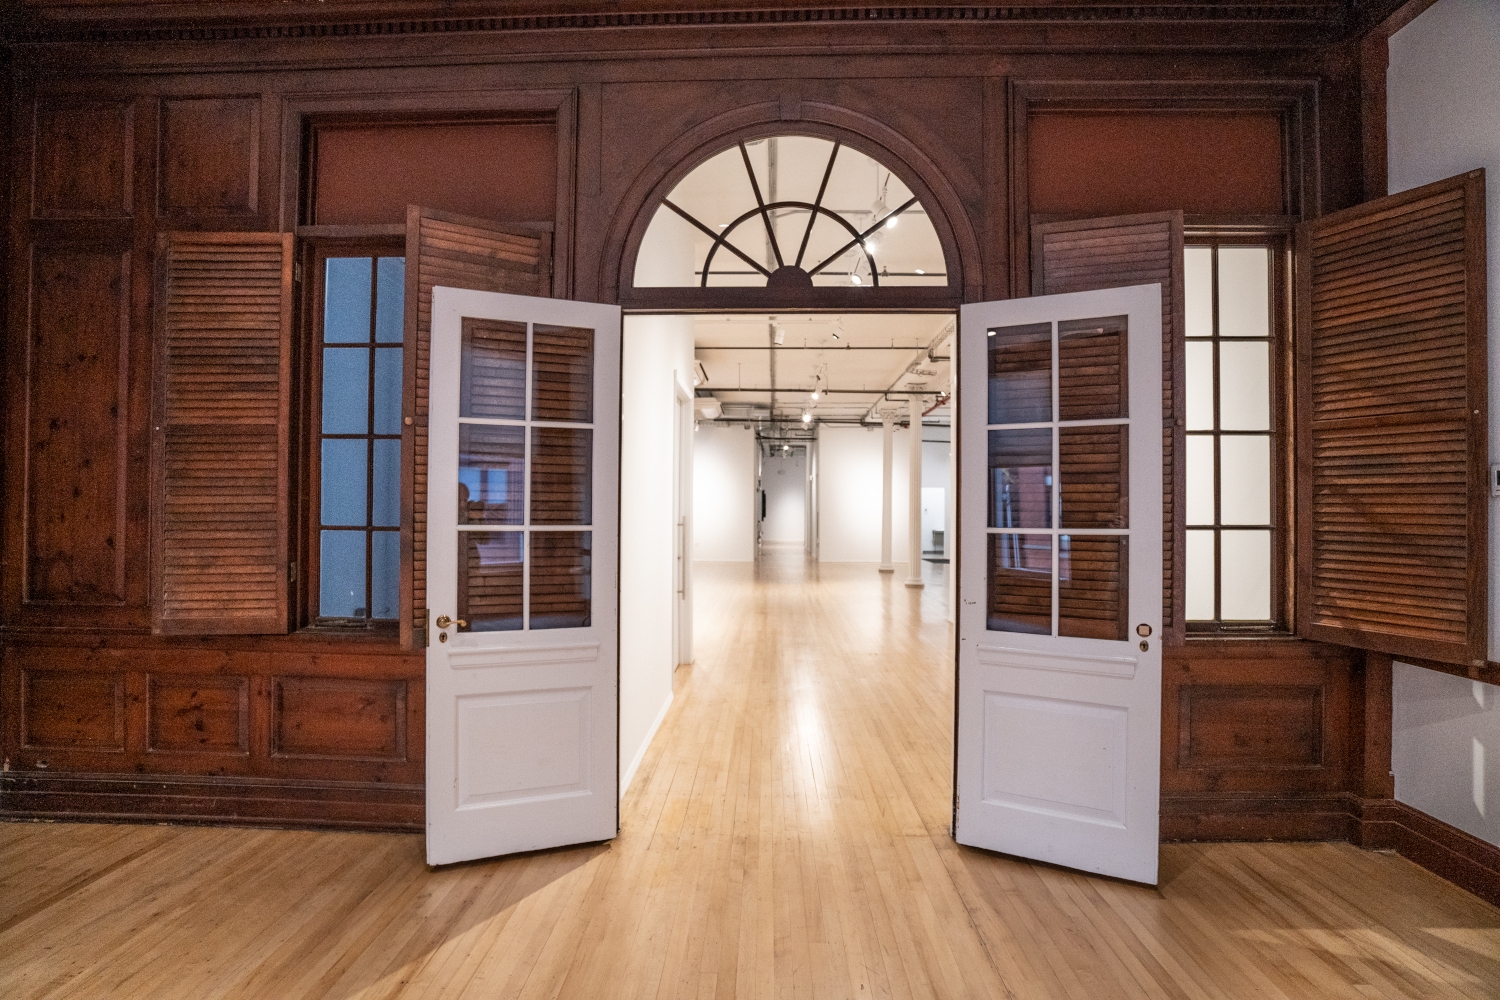 Interior view of 80 White Street in Manhattan, showcasing Jepol Construction's interior finishing services, including the restoration of historic wood elements, wood floor refinishing, wooden glass door replacement, steel column restoration, and painting. The image also shows new gypsum partitions, an example of Jepol's expertise in interior renovations and restorations.